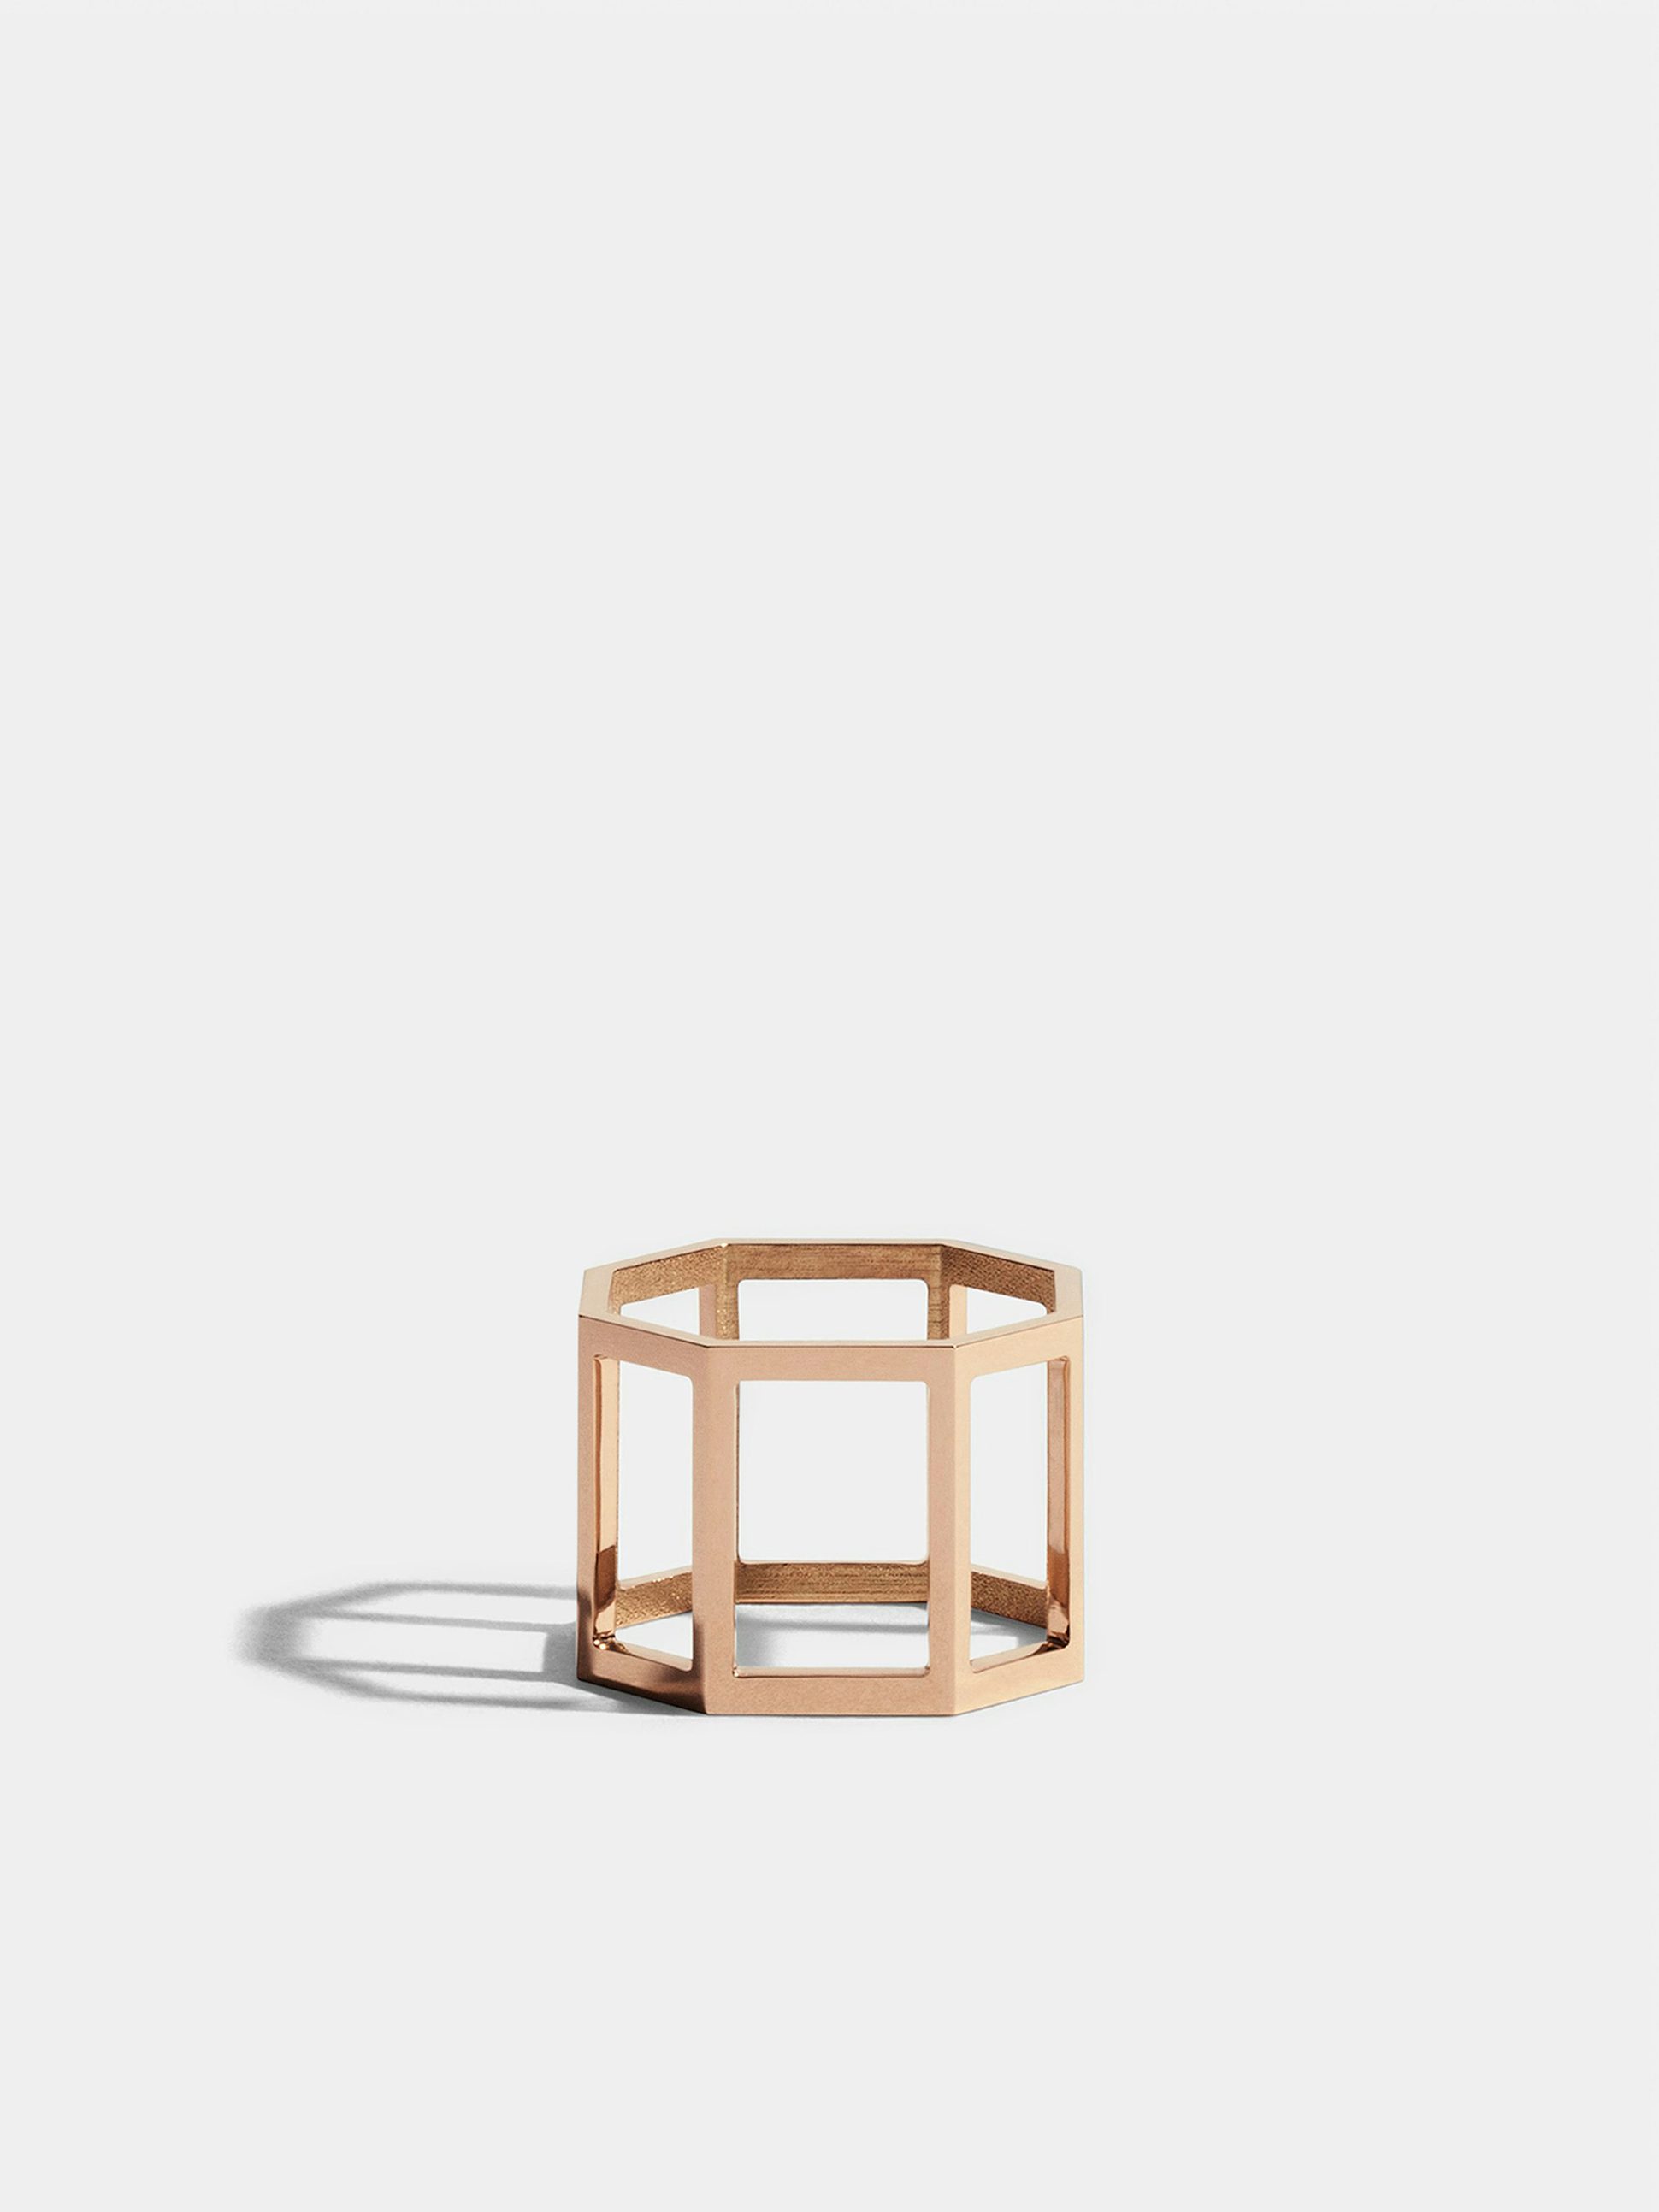 Octogone structured ring in 18k Fairmined ethical rose gold (14mm)